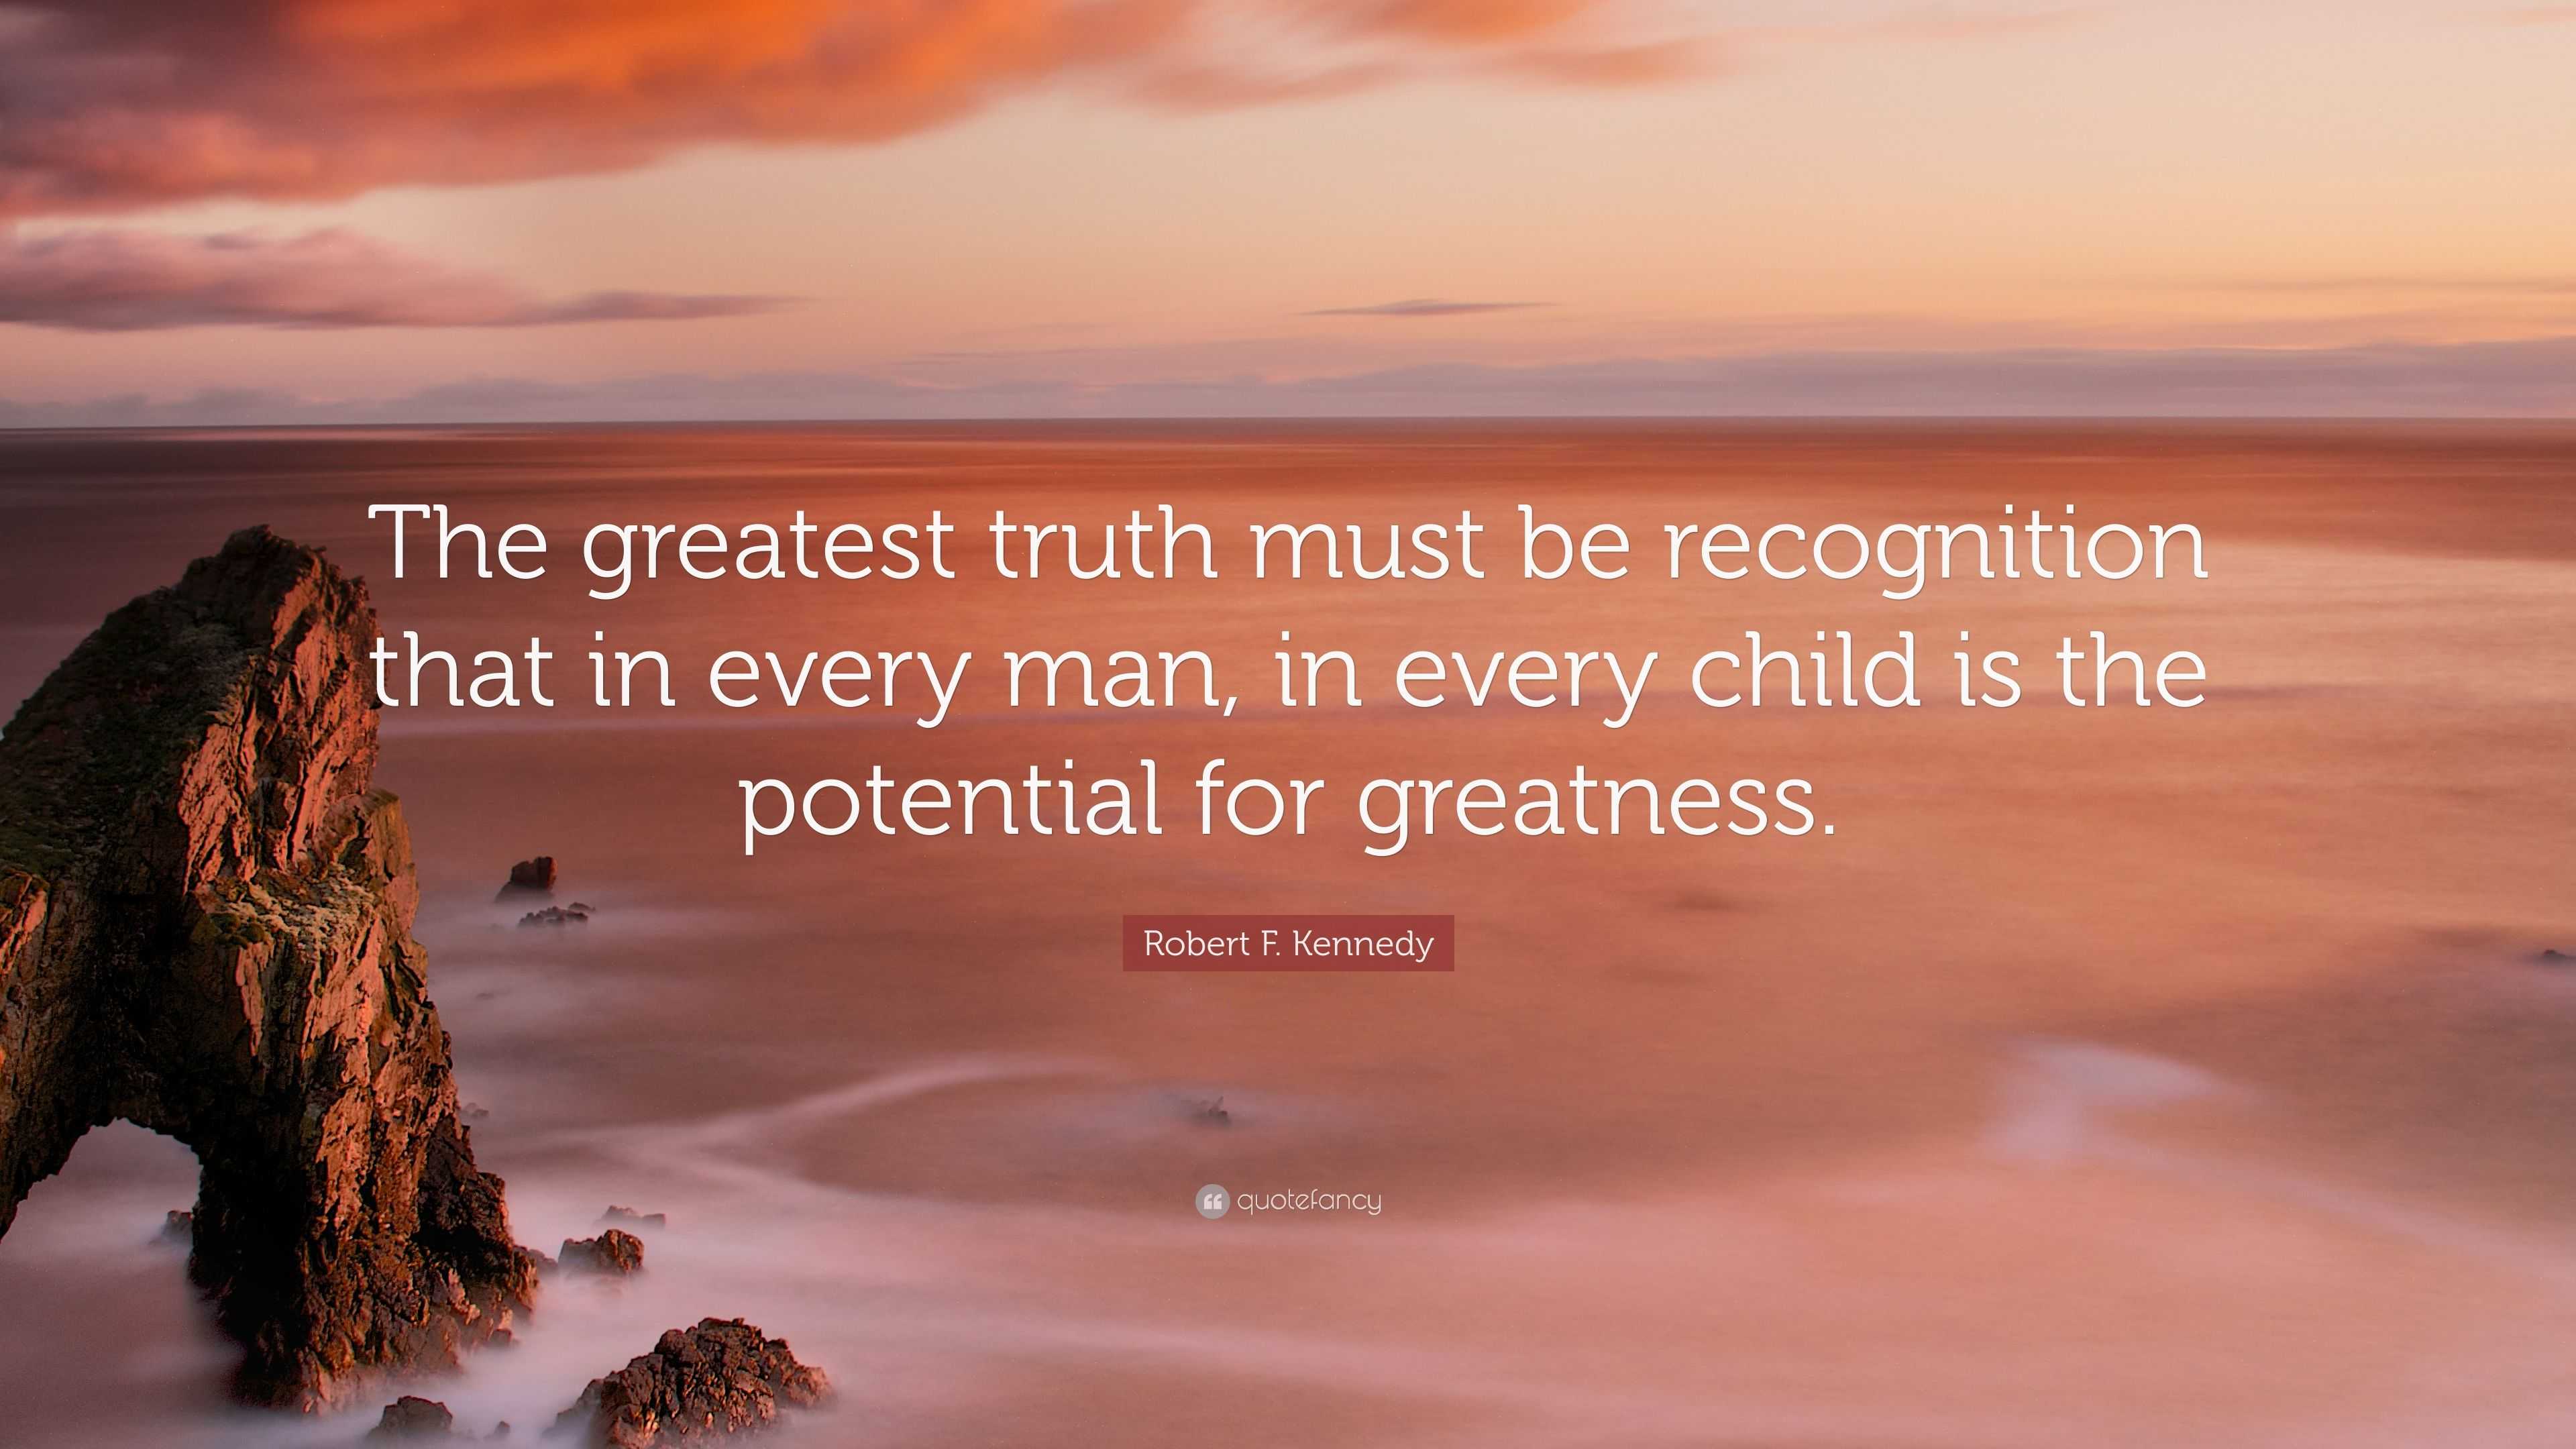 Greatness: What is the greatest thing about the greatest man in